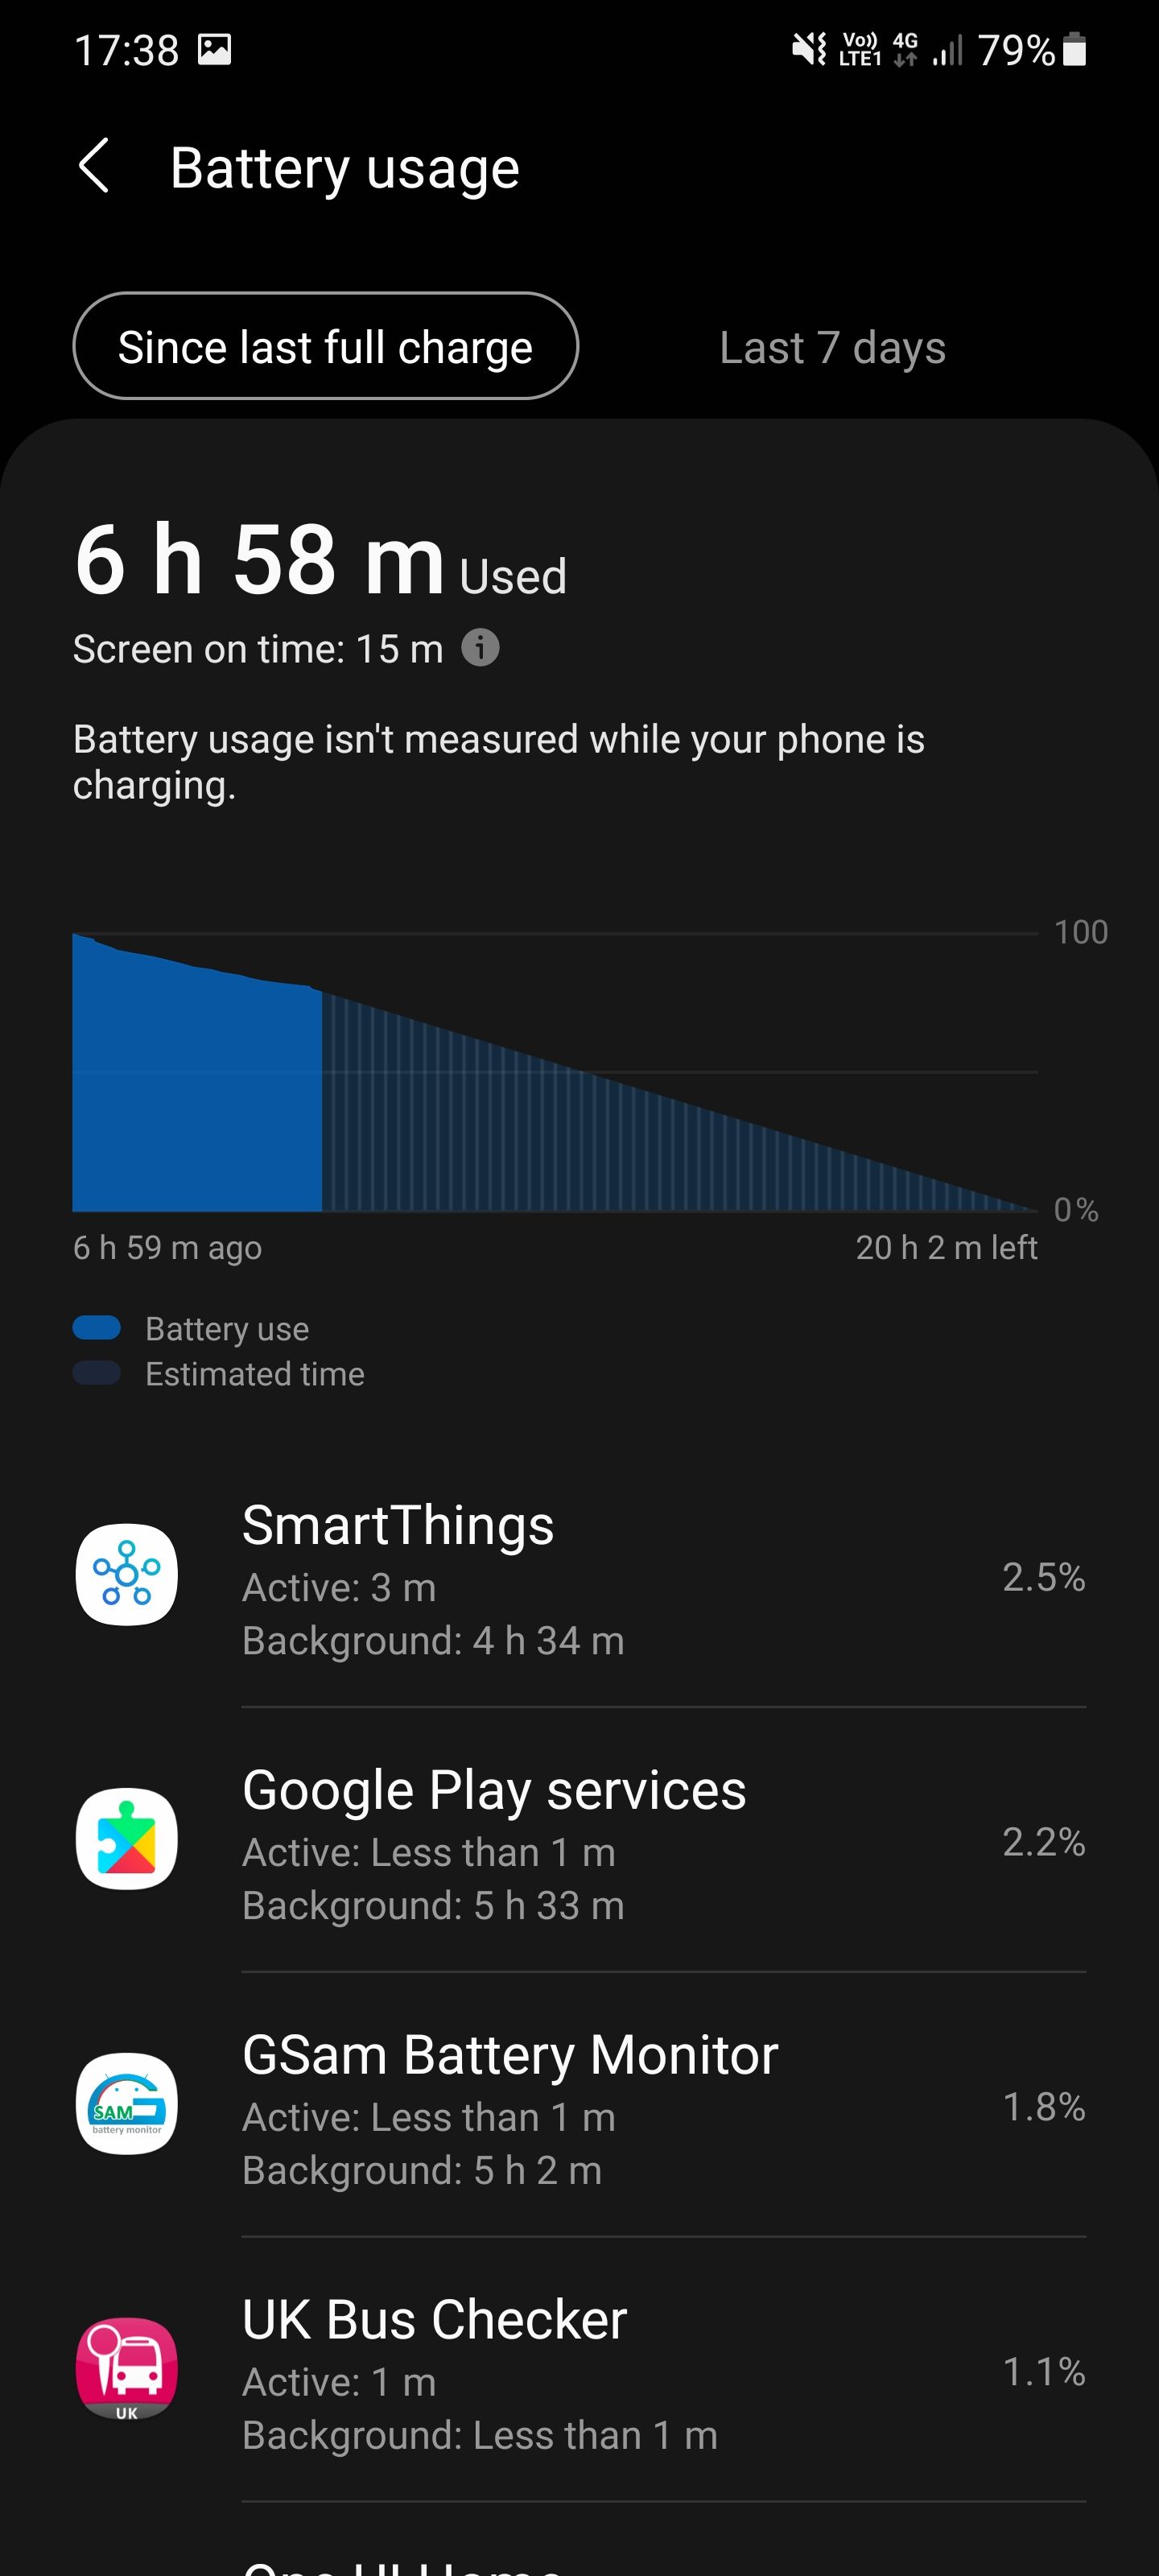 Galaxy s9 + April security update battery drain - Samsung Community